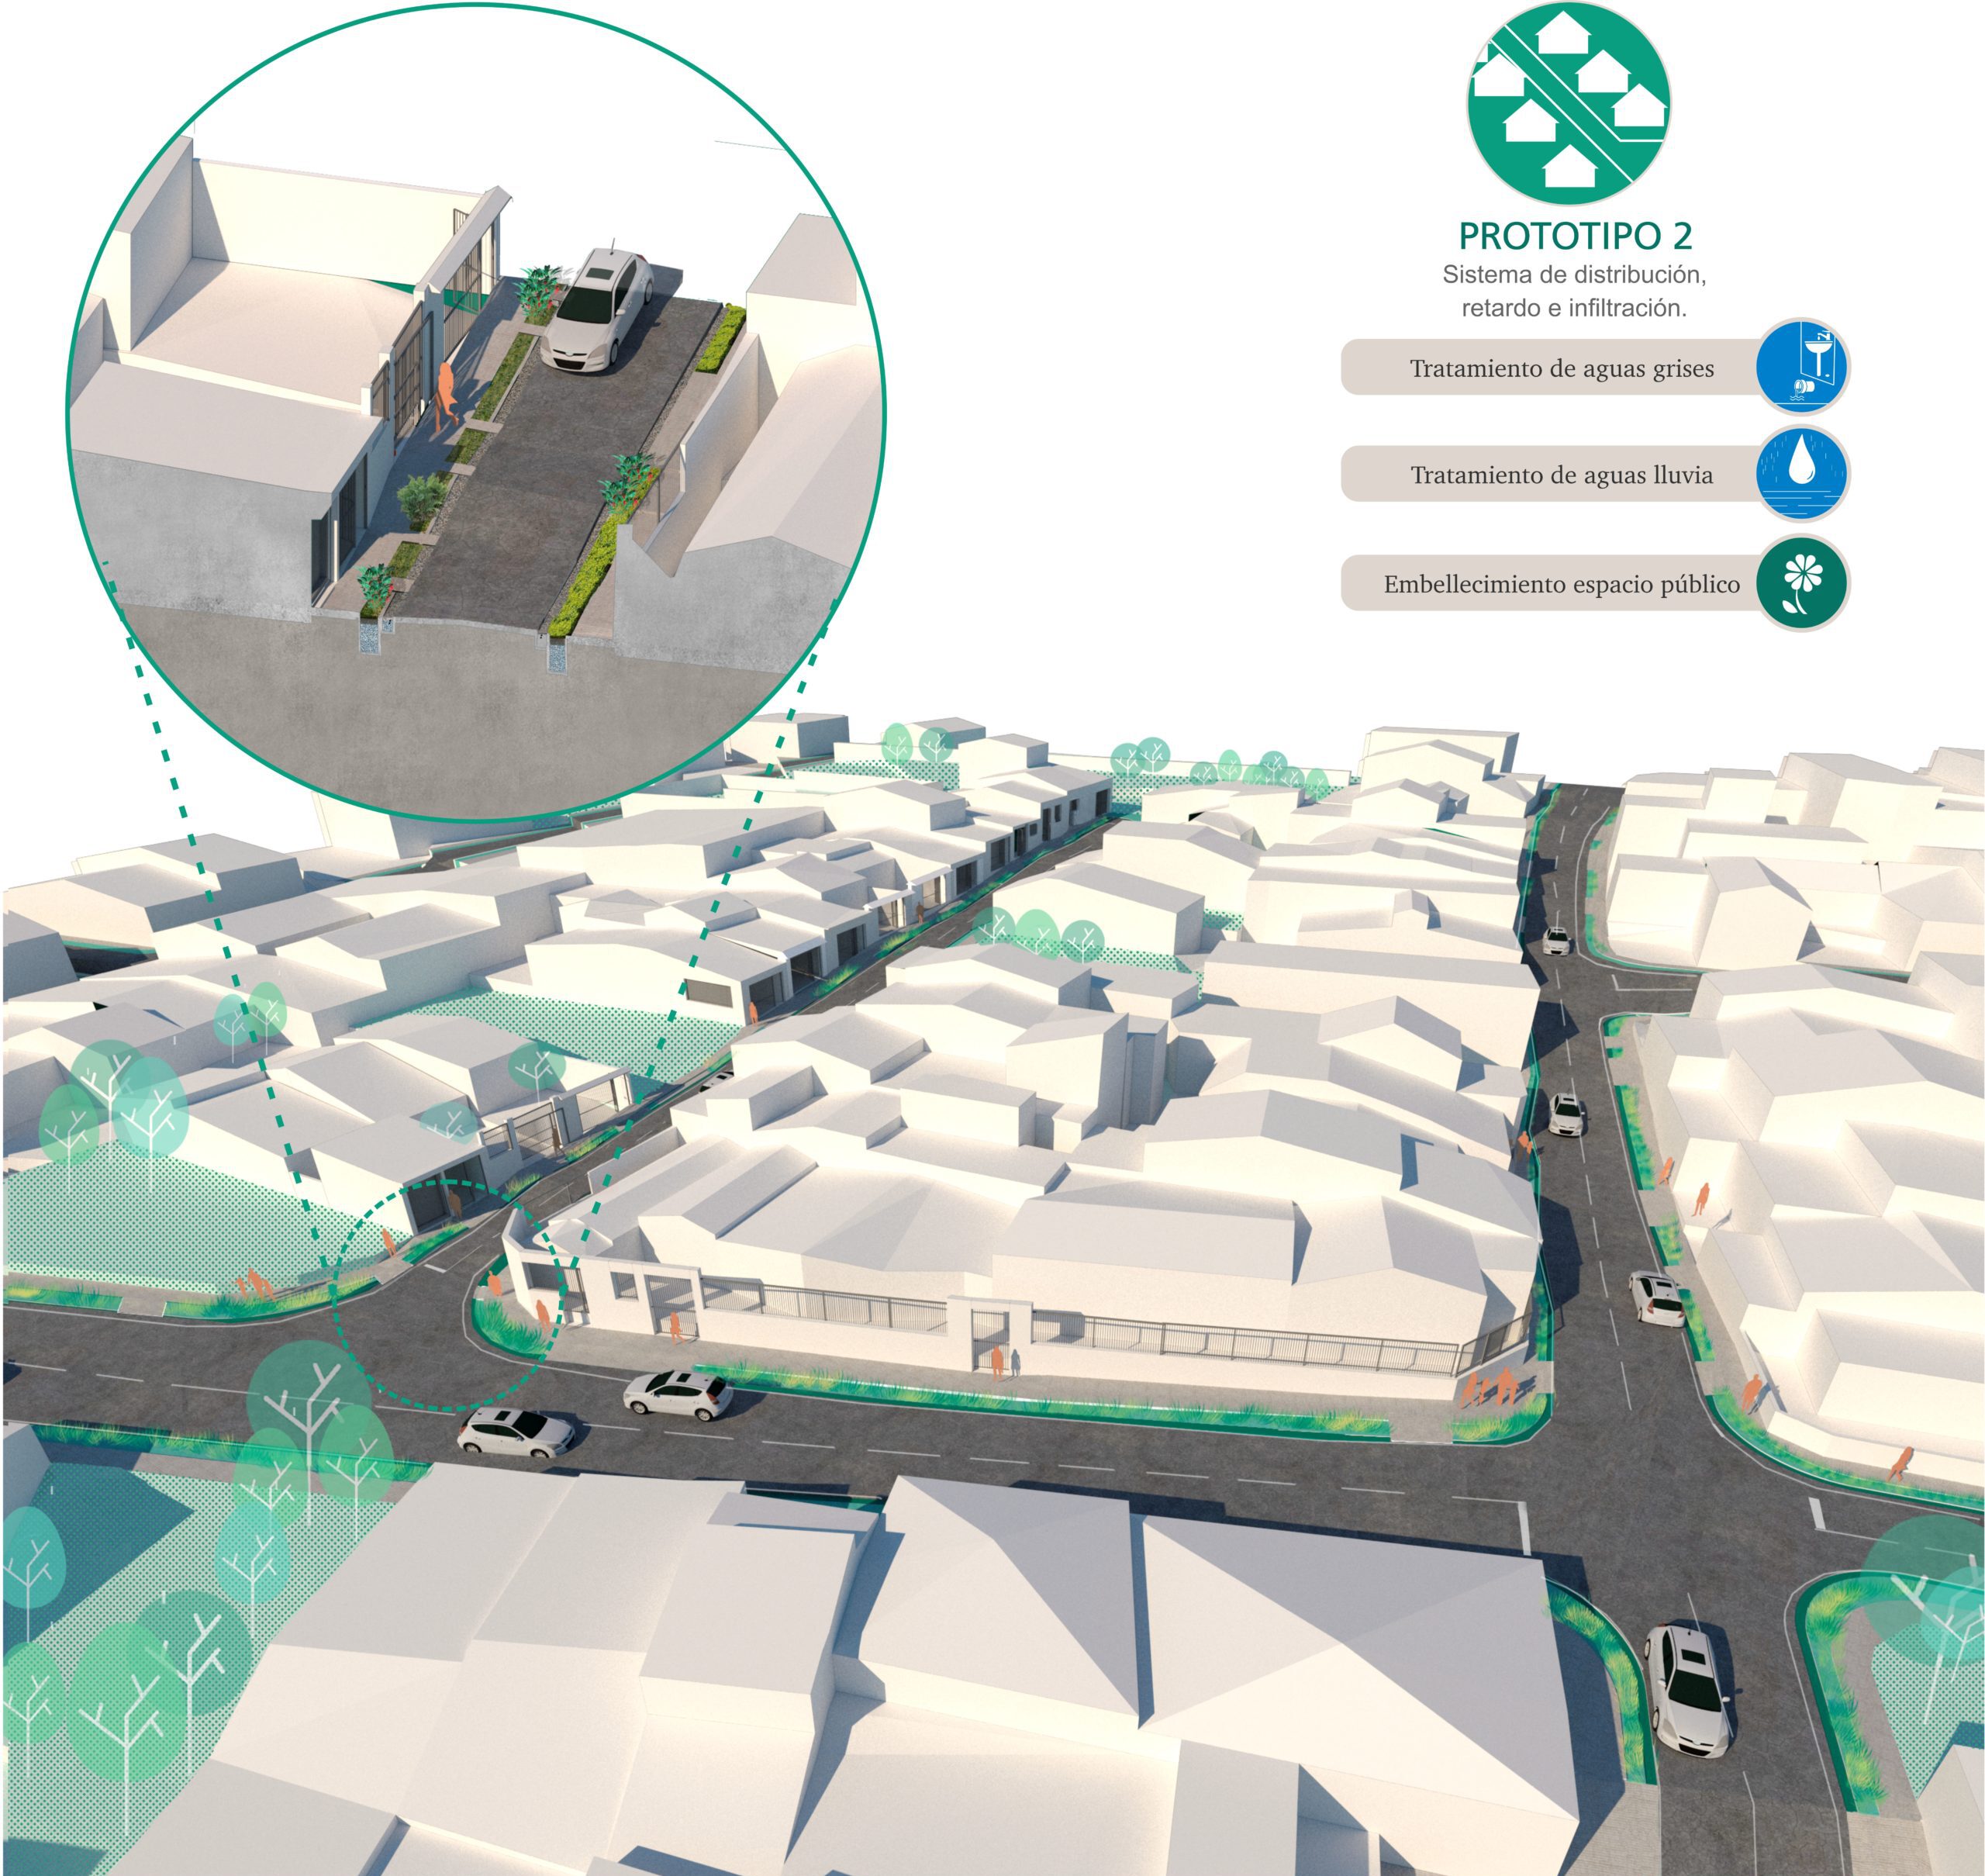 Design green infrastructure prototypes in already developed urban areas